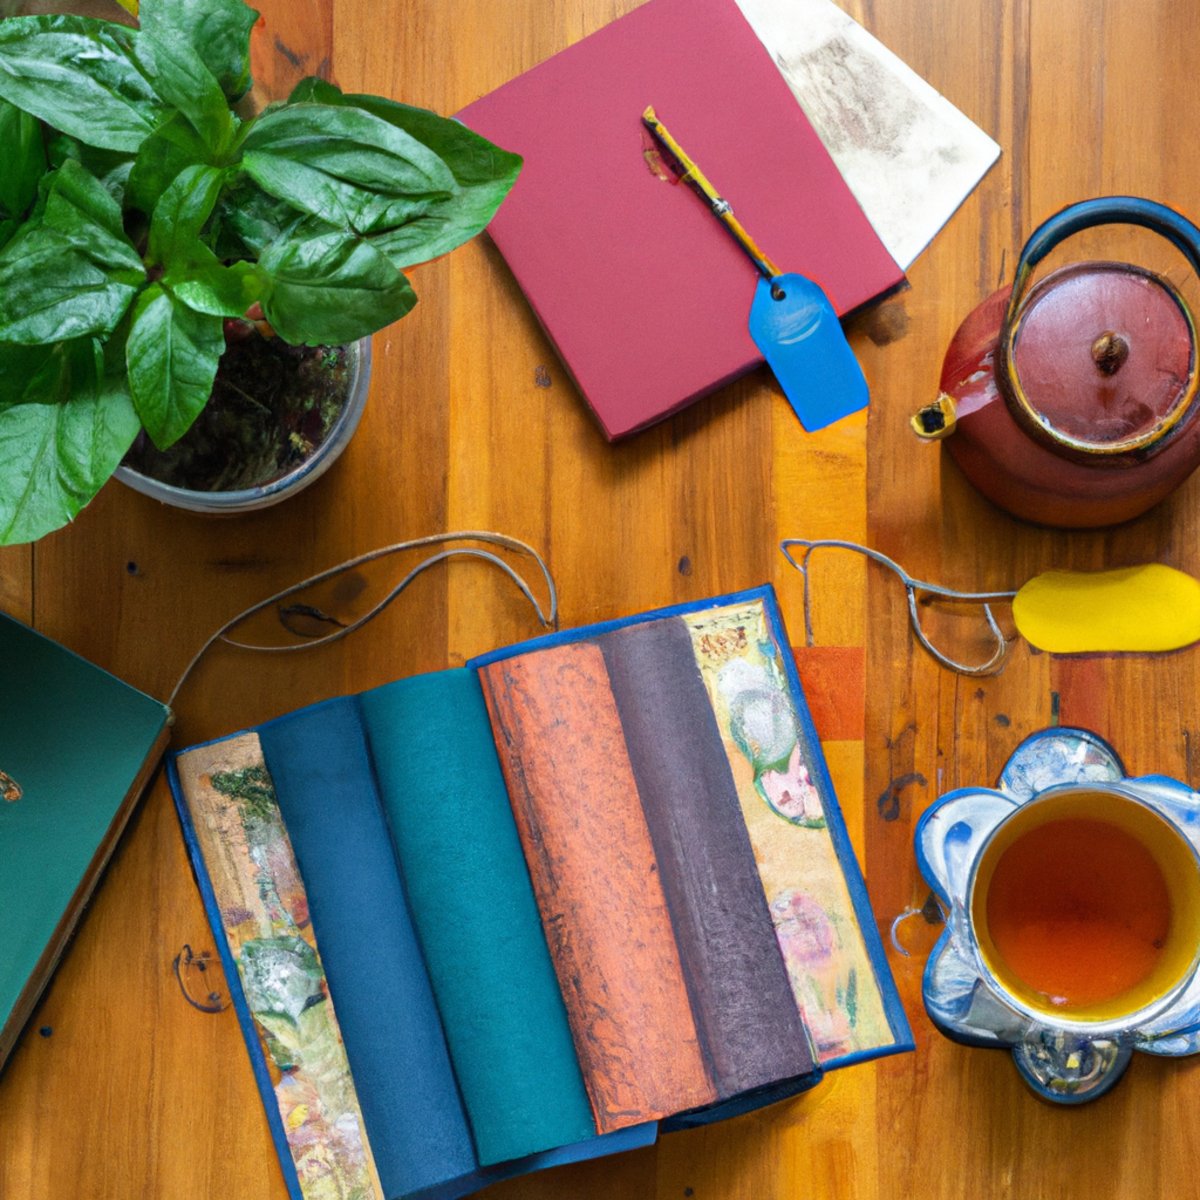 A calming scene of a wooden table with a potted plant, books, tea, and journal, promoting holistic stress management.